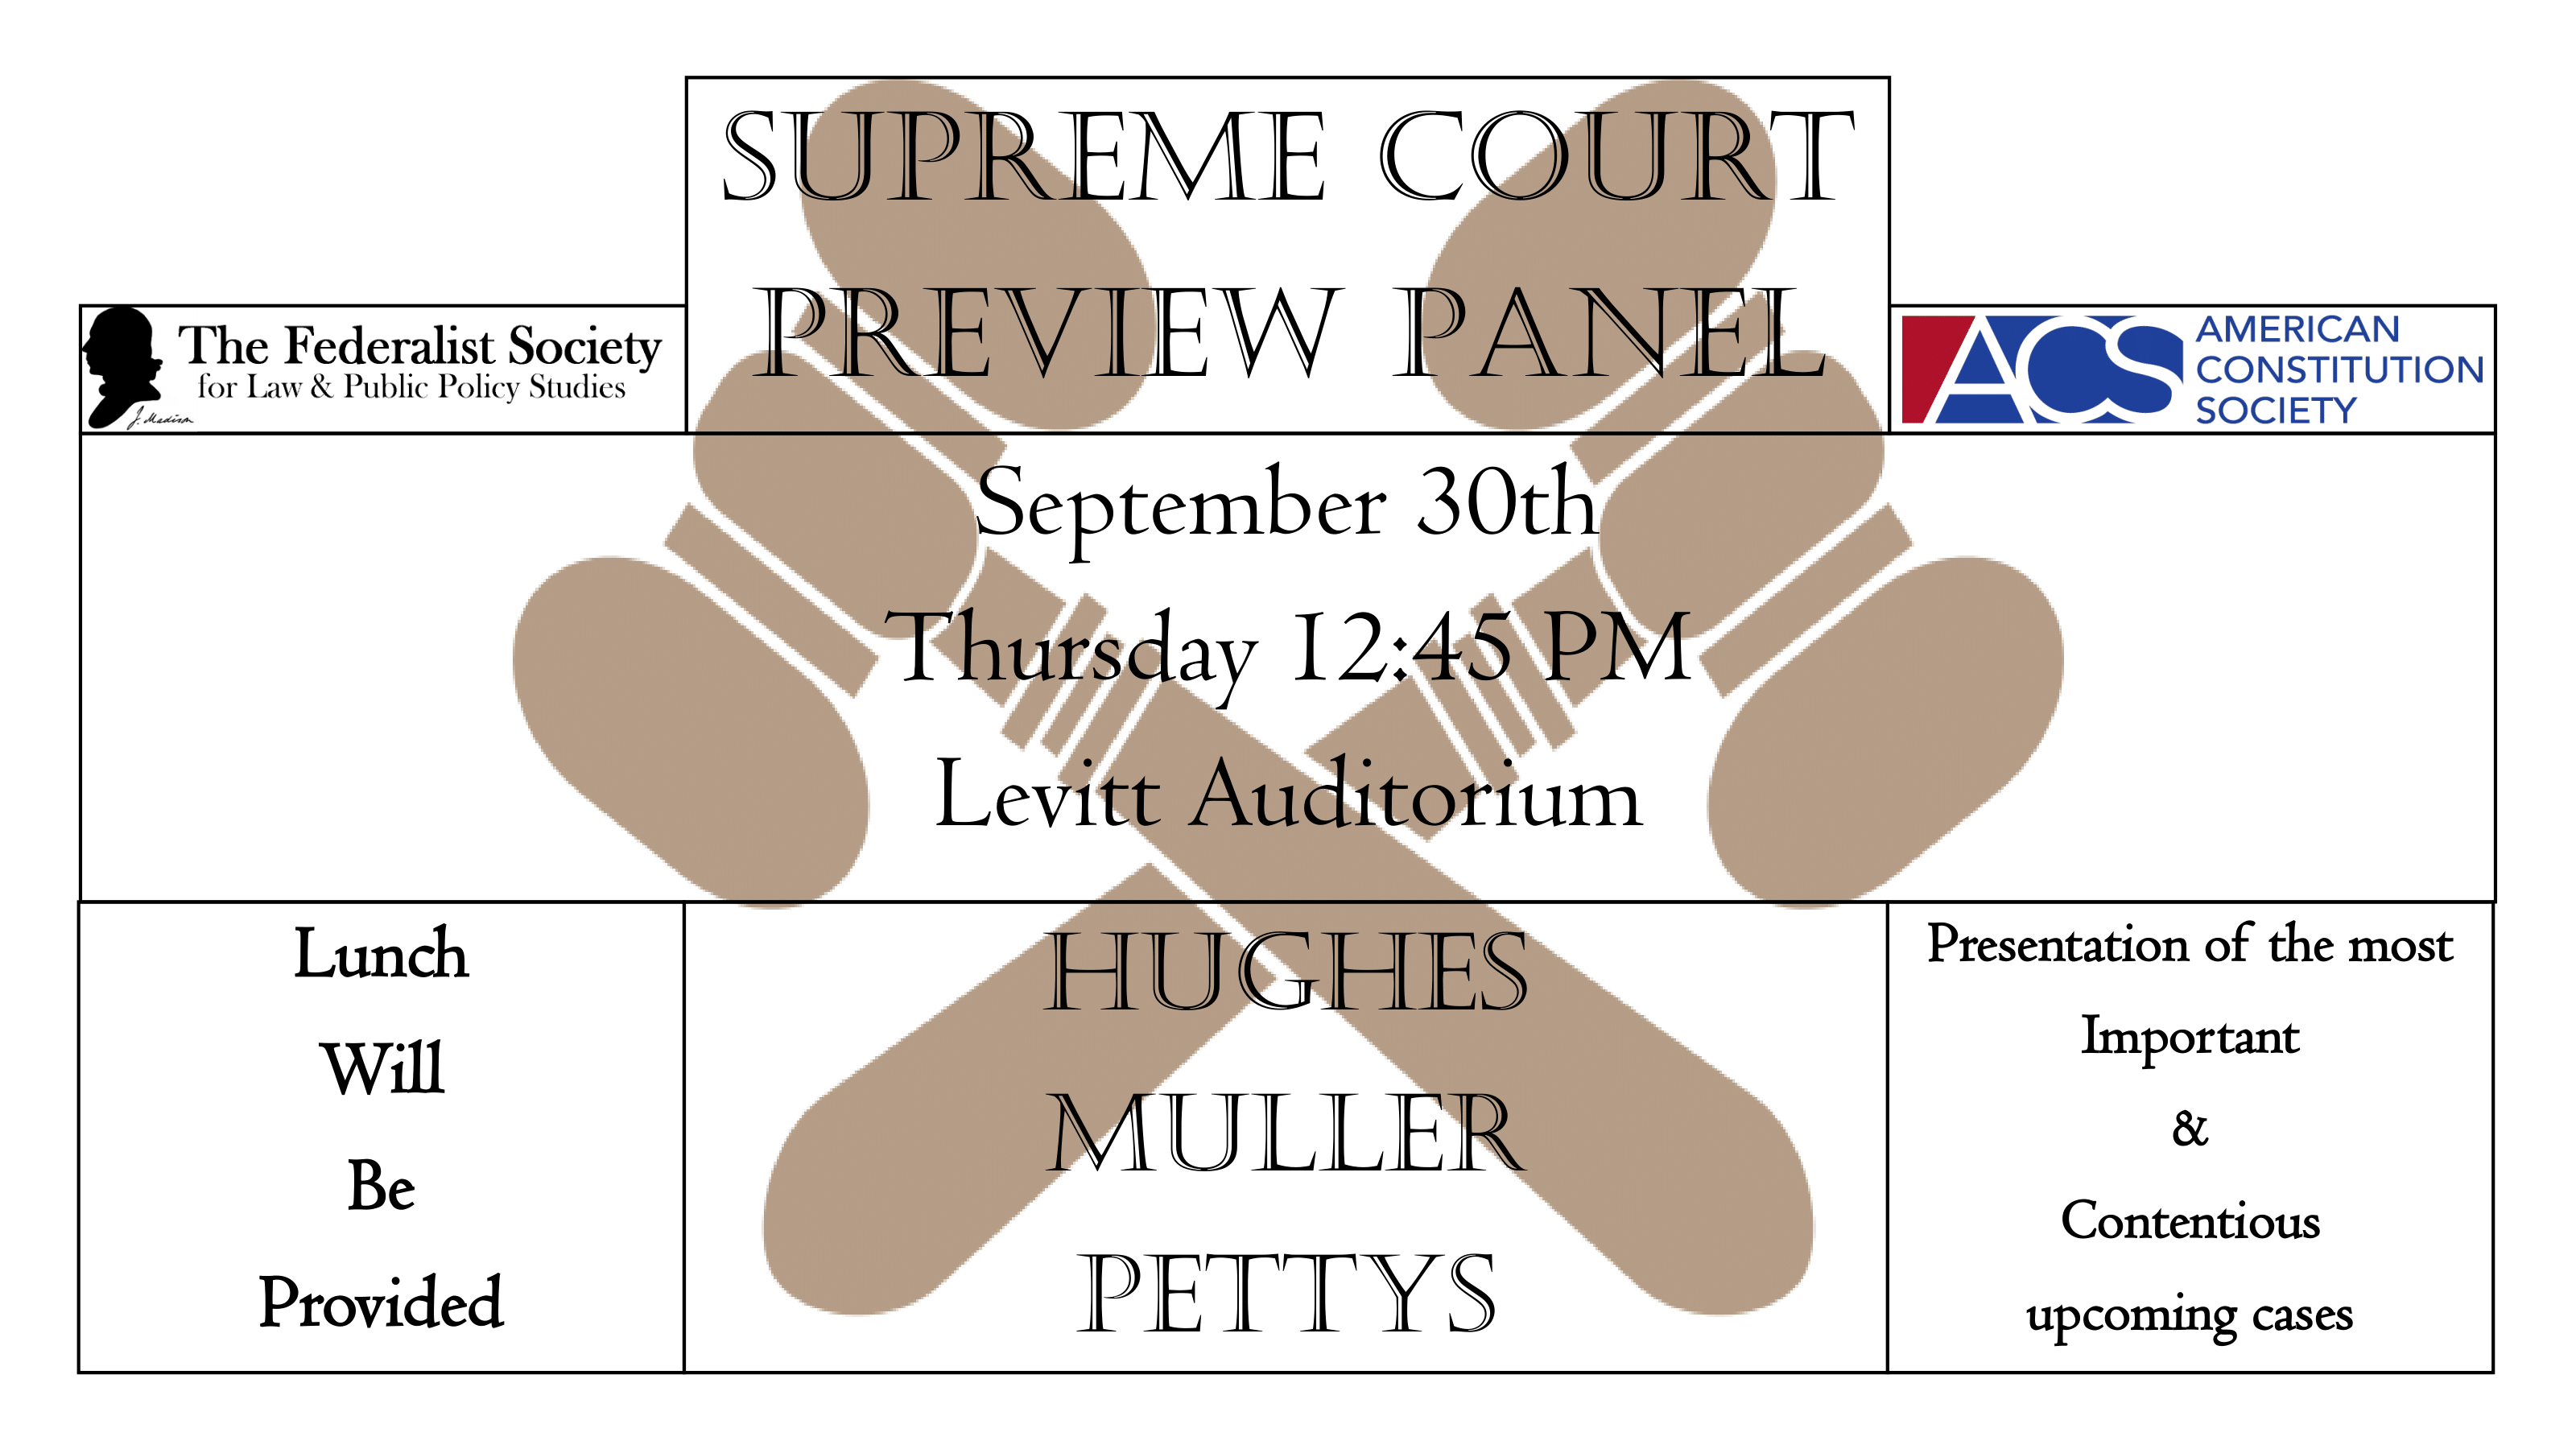 Supreme Court Preview Panel    Hosted Jointly by The Federalist Society and The American Constitutional Society    Thursday, September 30th, 12:45 PM, in Levitt Auditorium    Professors Hughes, Muller, and Pettys    A presentation of the most important and contentious upcoming cases.    Lunch will be provided!